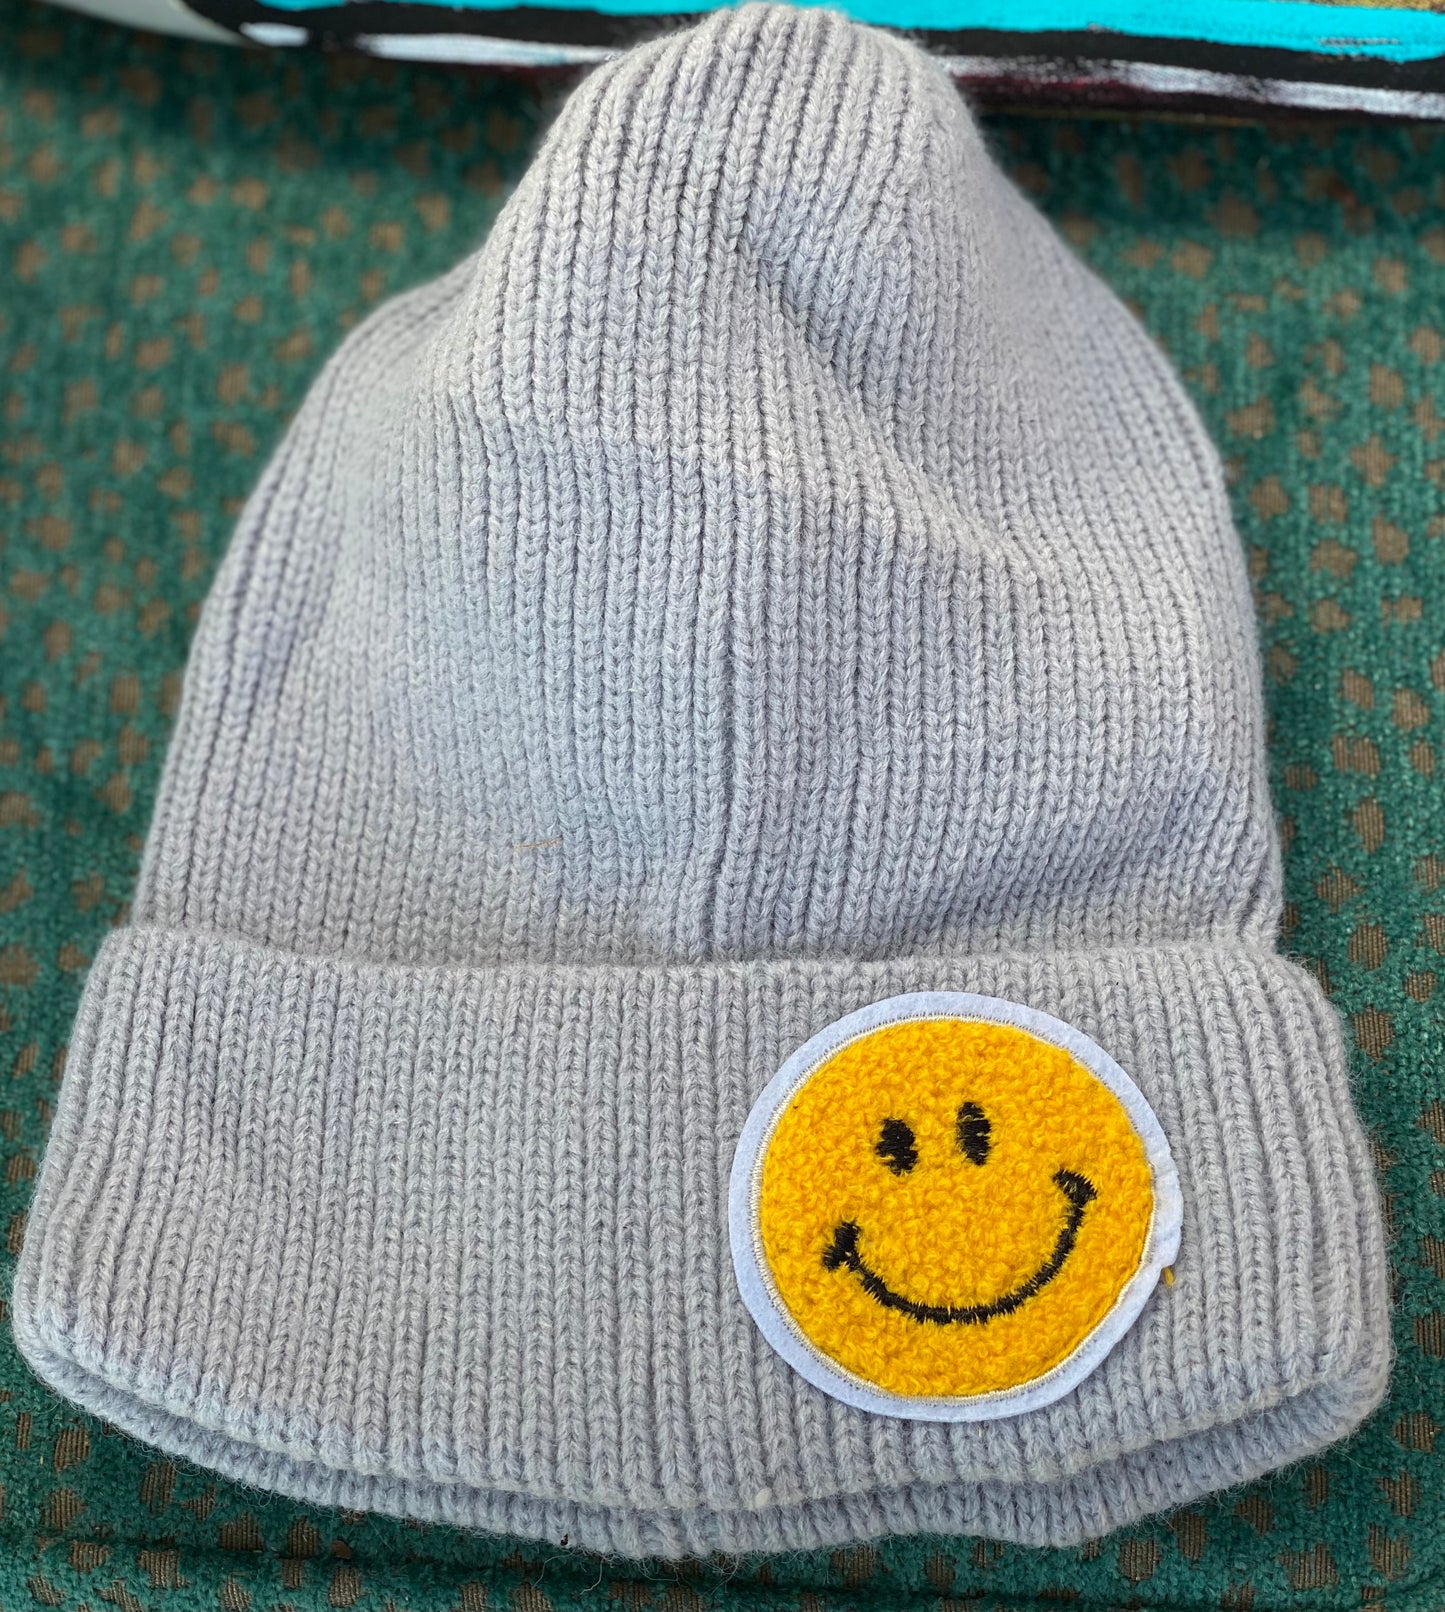 Smiley Face Beanie Hats